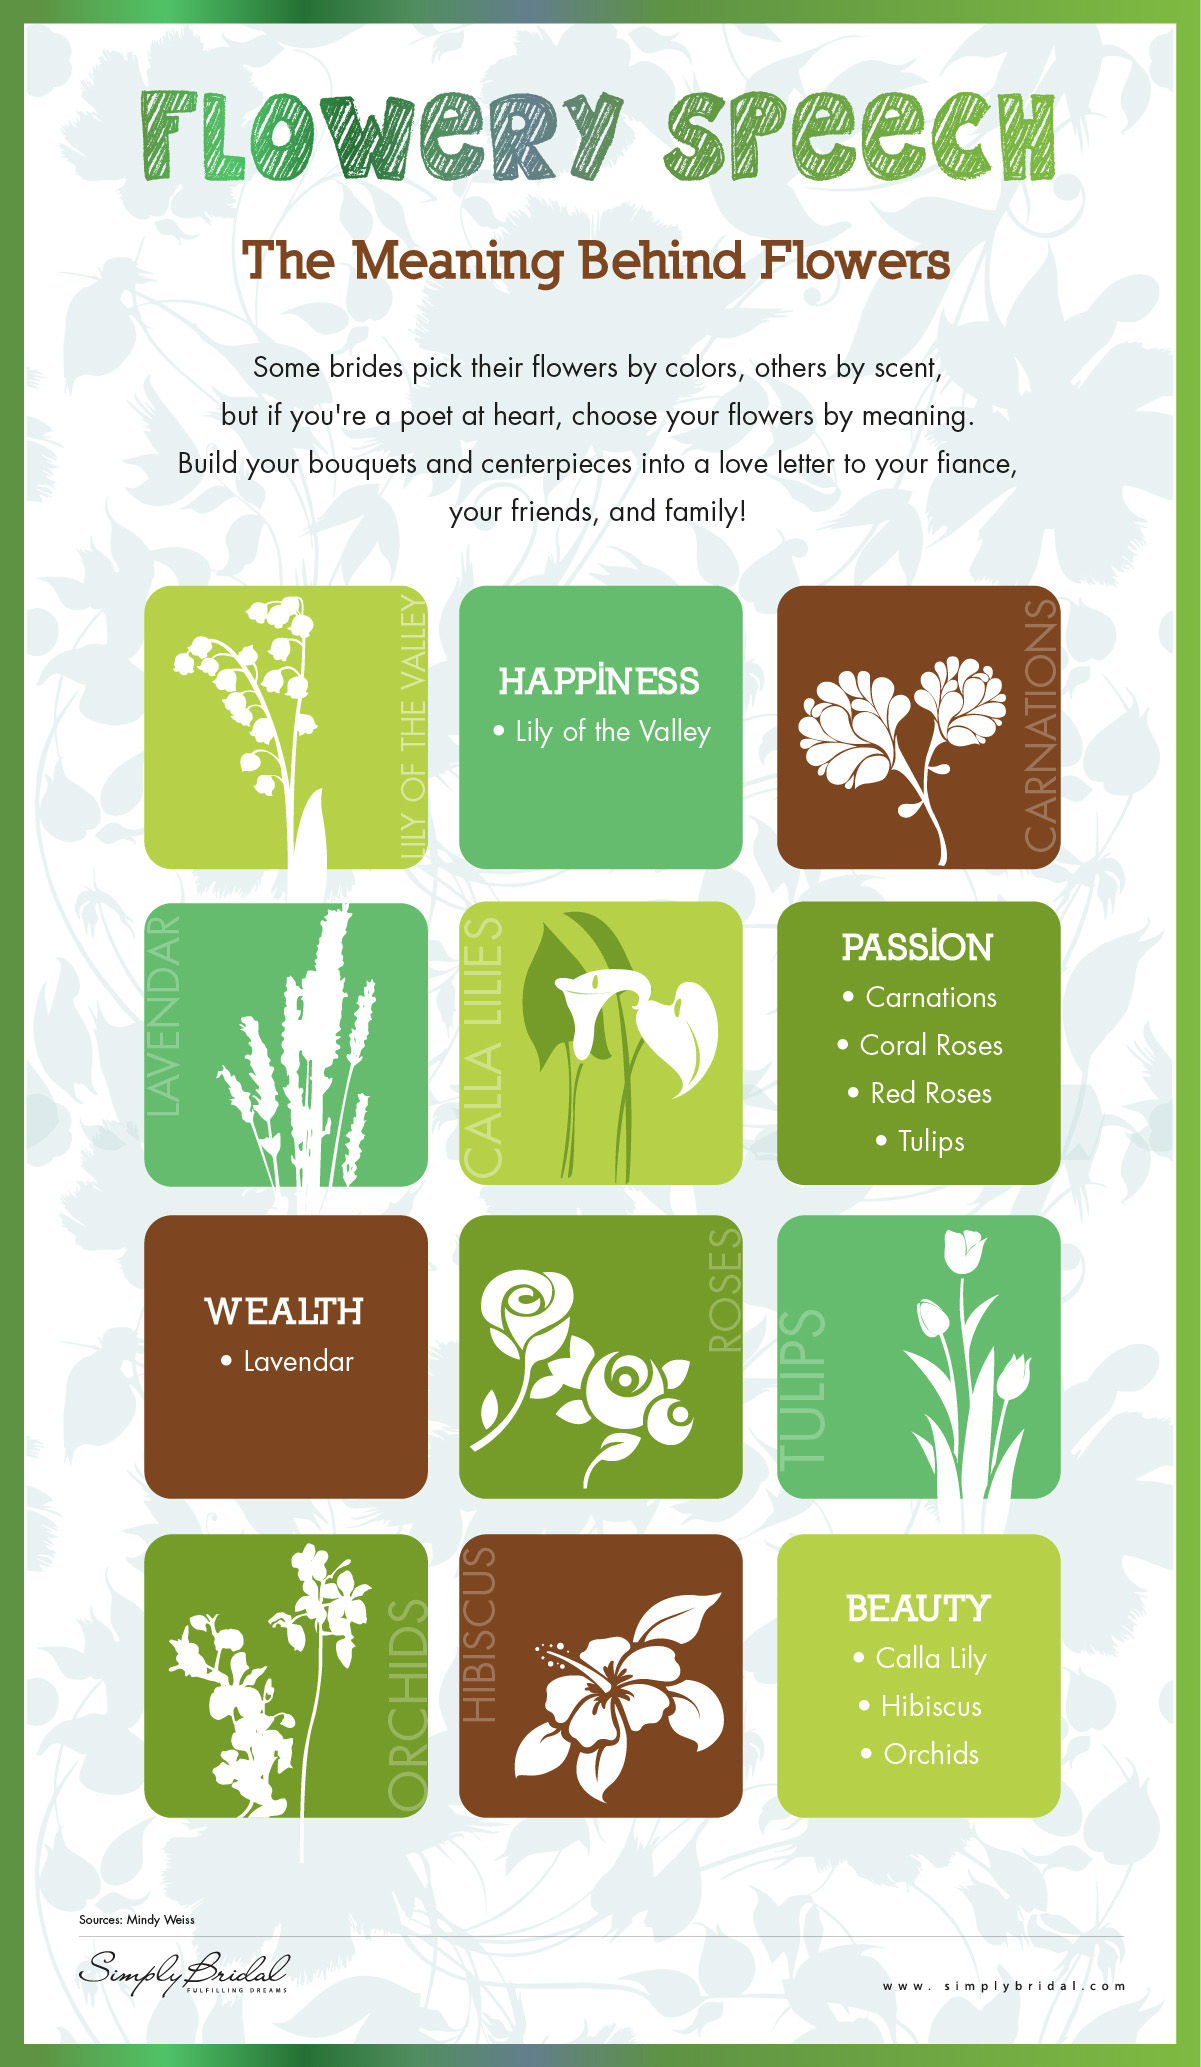 [Infographic] Meanings of Popular Wedding Flowers | A Wedding Blog